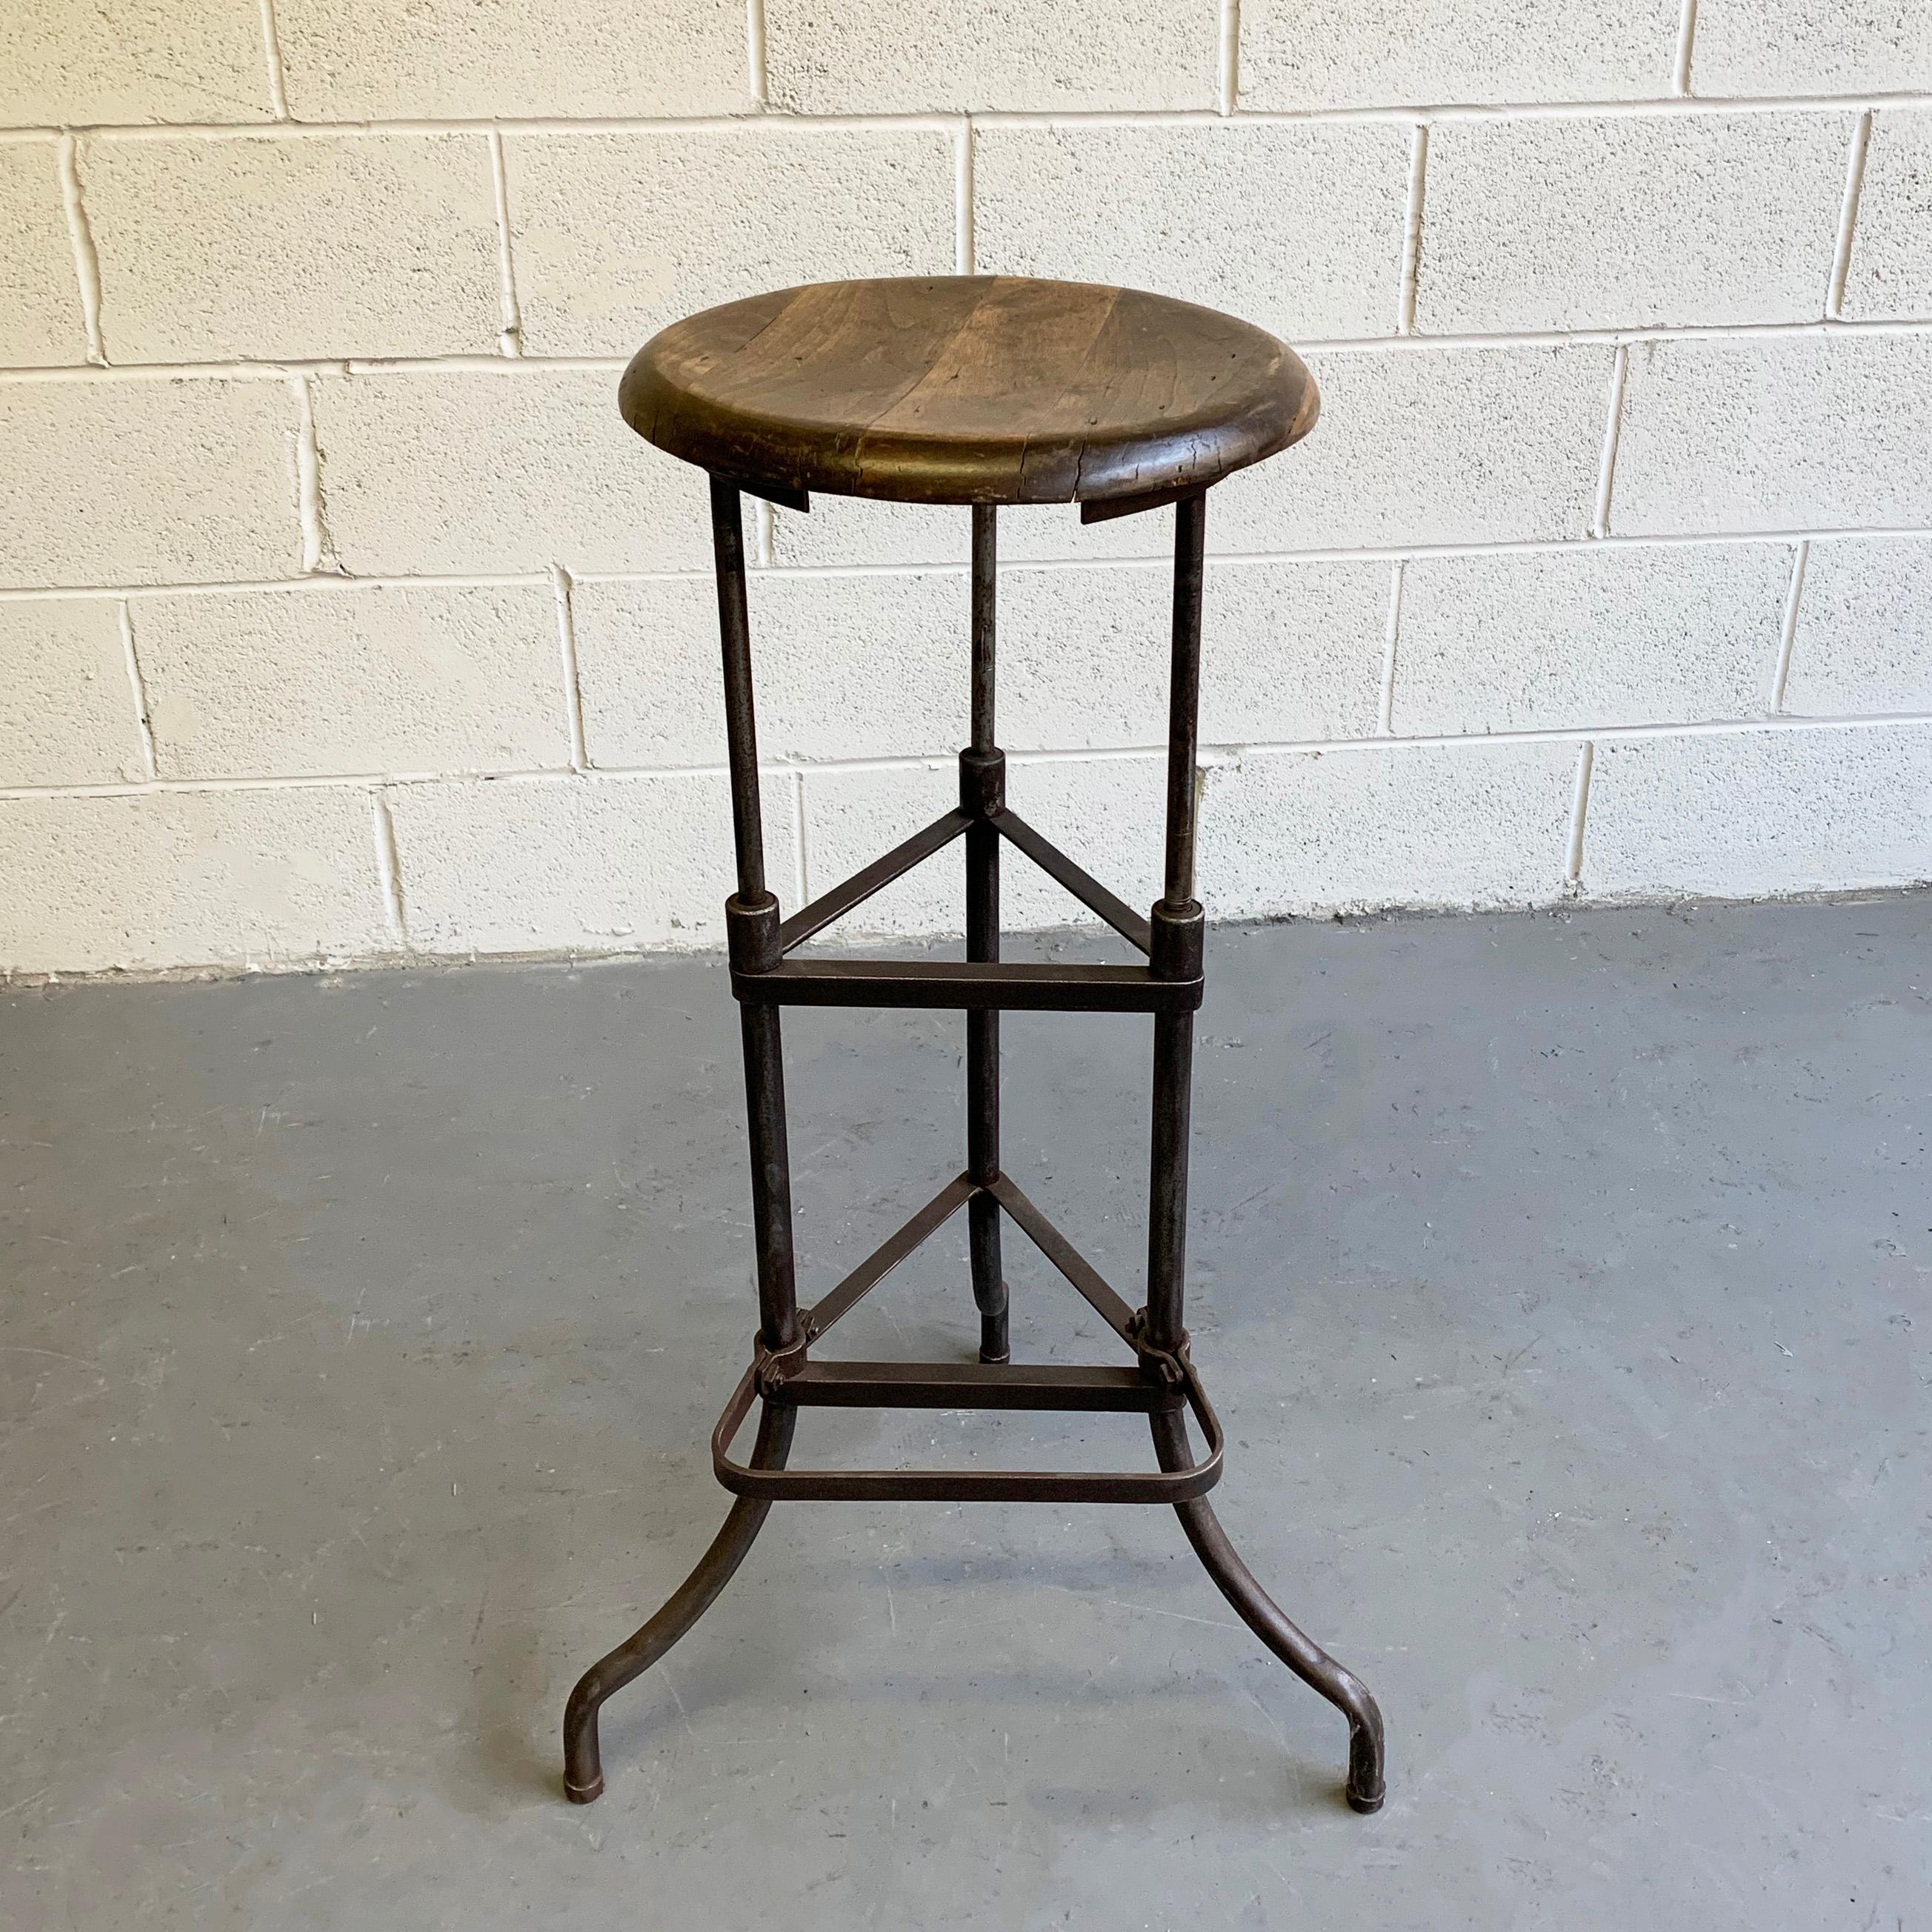 Brushed Early 20th Century Industrial Drafting Stool with Footrest